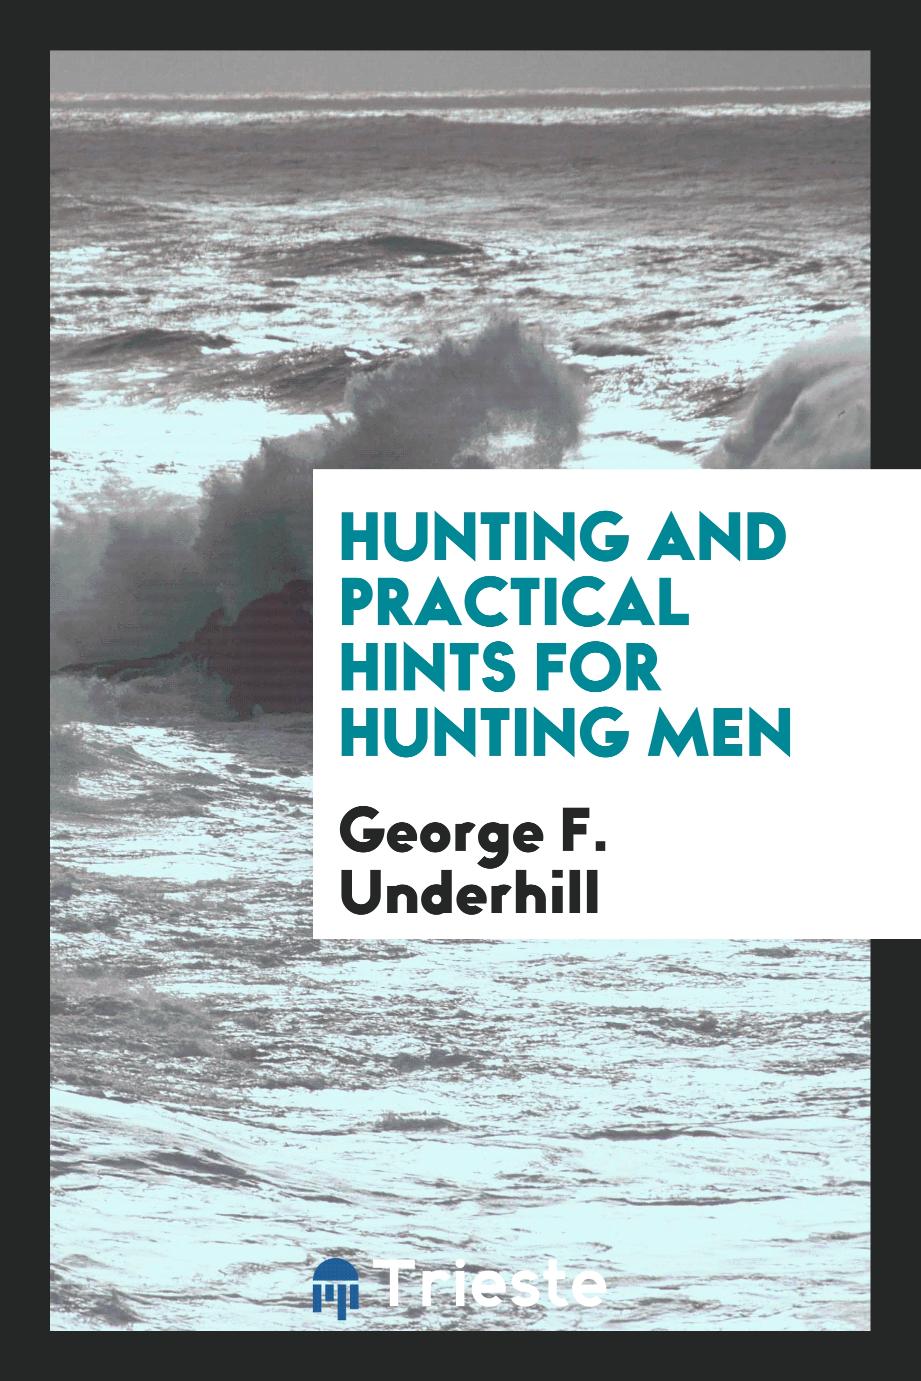 Hunting and practical hints for hunting men